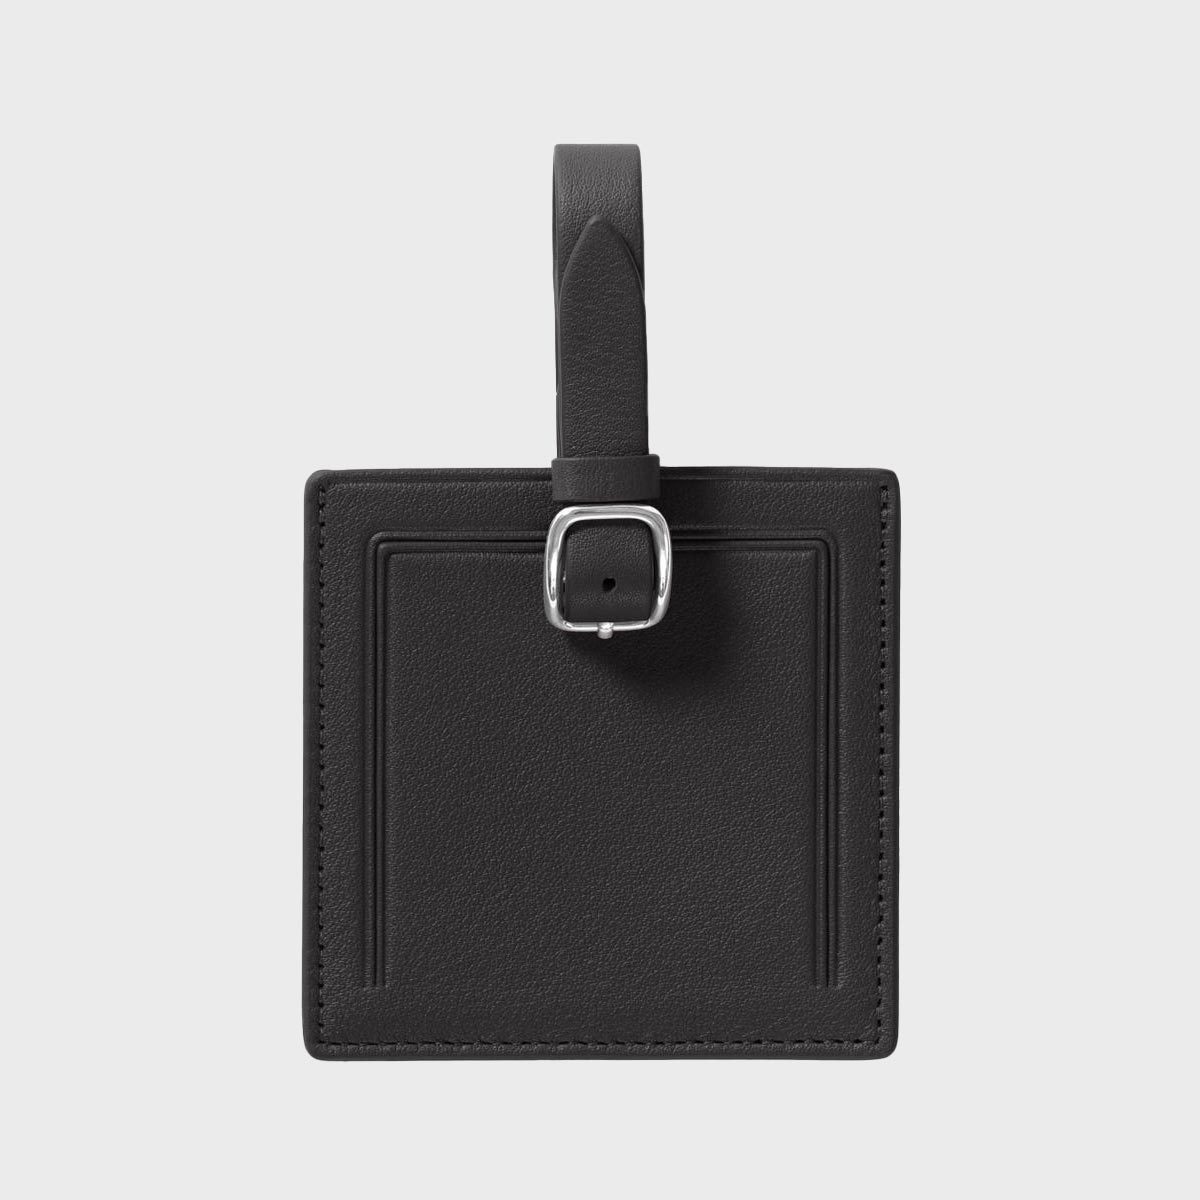 <p>For a more refined look, one might appreciate the sophistication of leather. <a href="https://www.leatherology.com/small-square-luggage-tag" rel="noopener">Leatherology's tags</a> come in a variety of sizes and colors. An adjustable strap and an ID window with a privacy closure keep everything secure and safe. You can also personalize the grained leather, which is <a href="https://www.rd.com/article/how-to-clean-leather/">easy to clean</a>, to further set your bag apart from the crowd.</p> <p class="listicle-page__cta-button-shop"><a class="shop-btn" href="https://www.leatherology.com/small-square-luggage-tag">Shop Now</a></p>